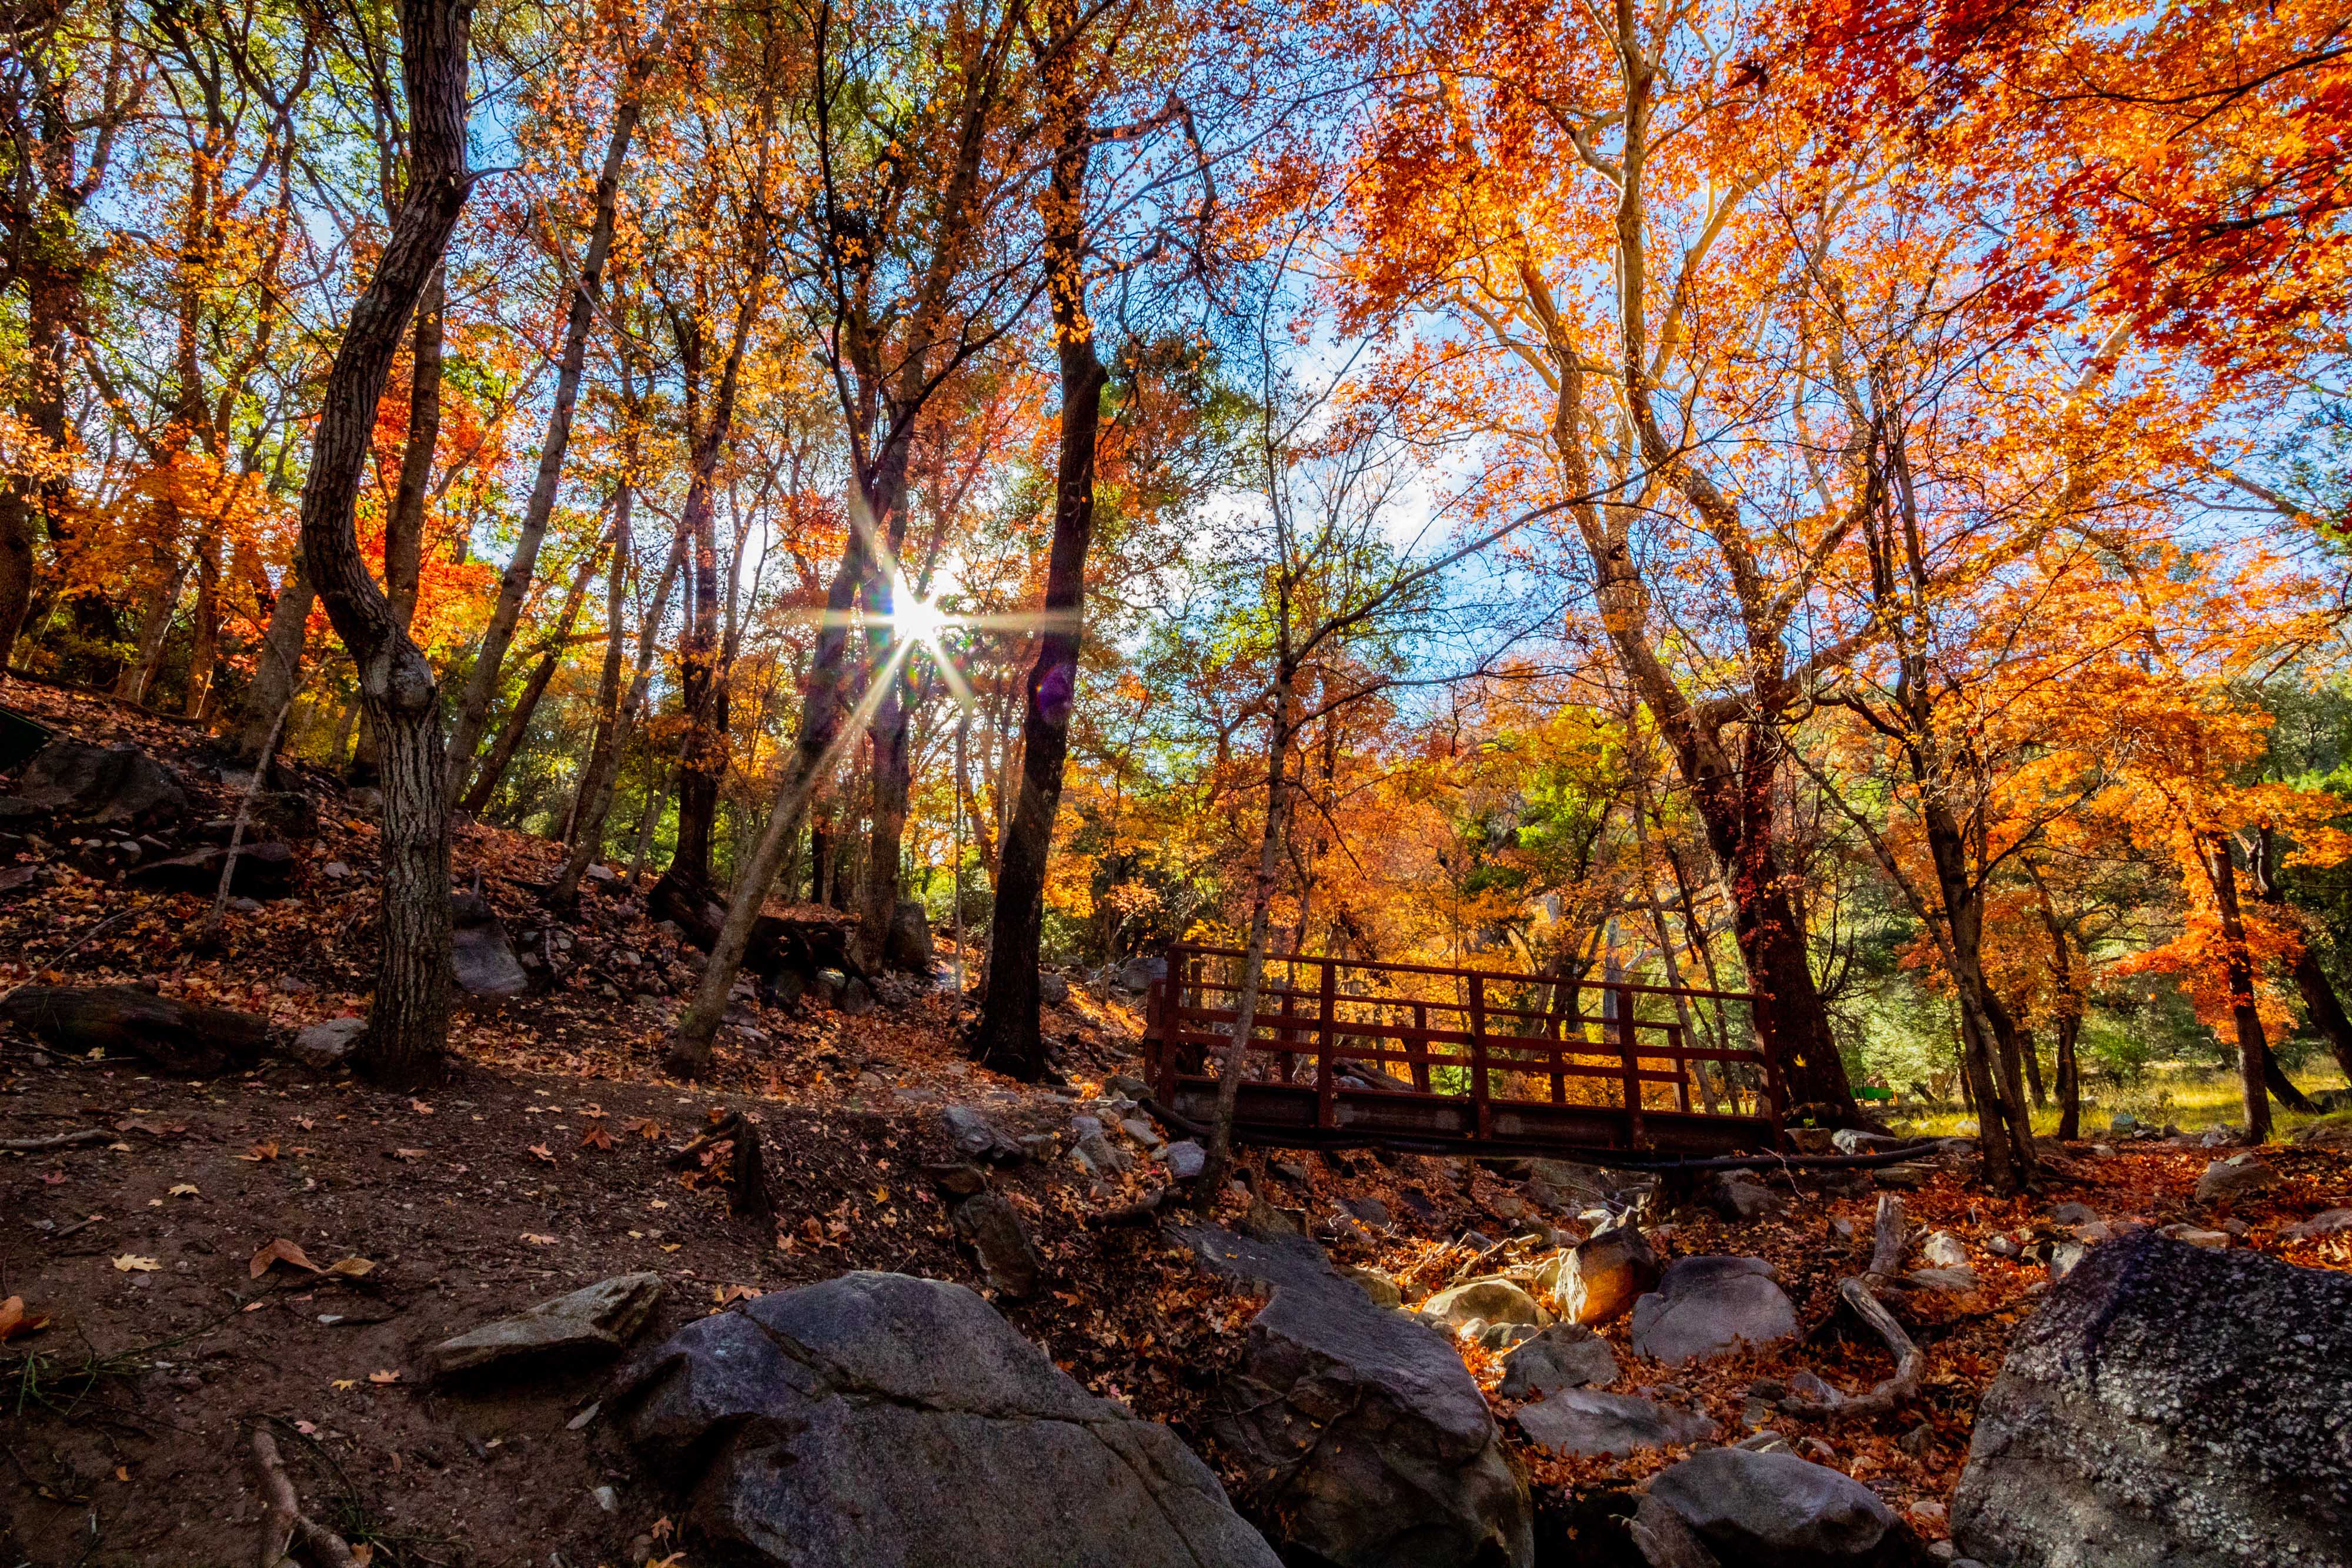 Footbridge surrounded by a forest in vivid fall colors in Ramsey Canyon.